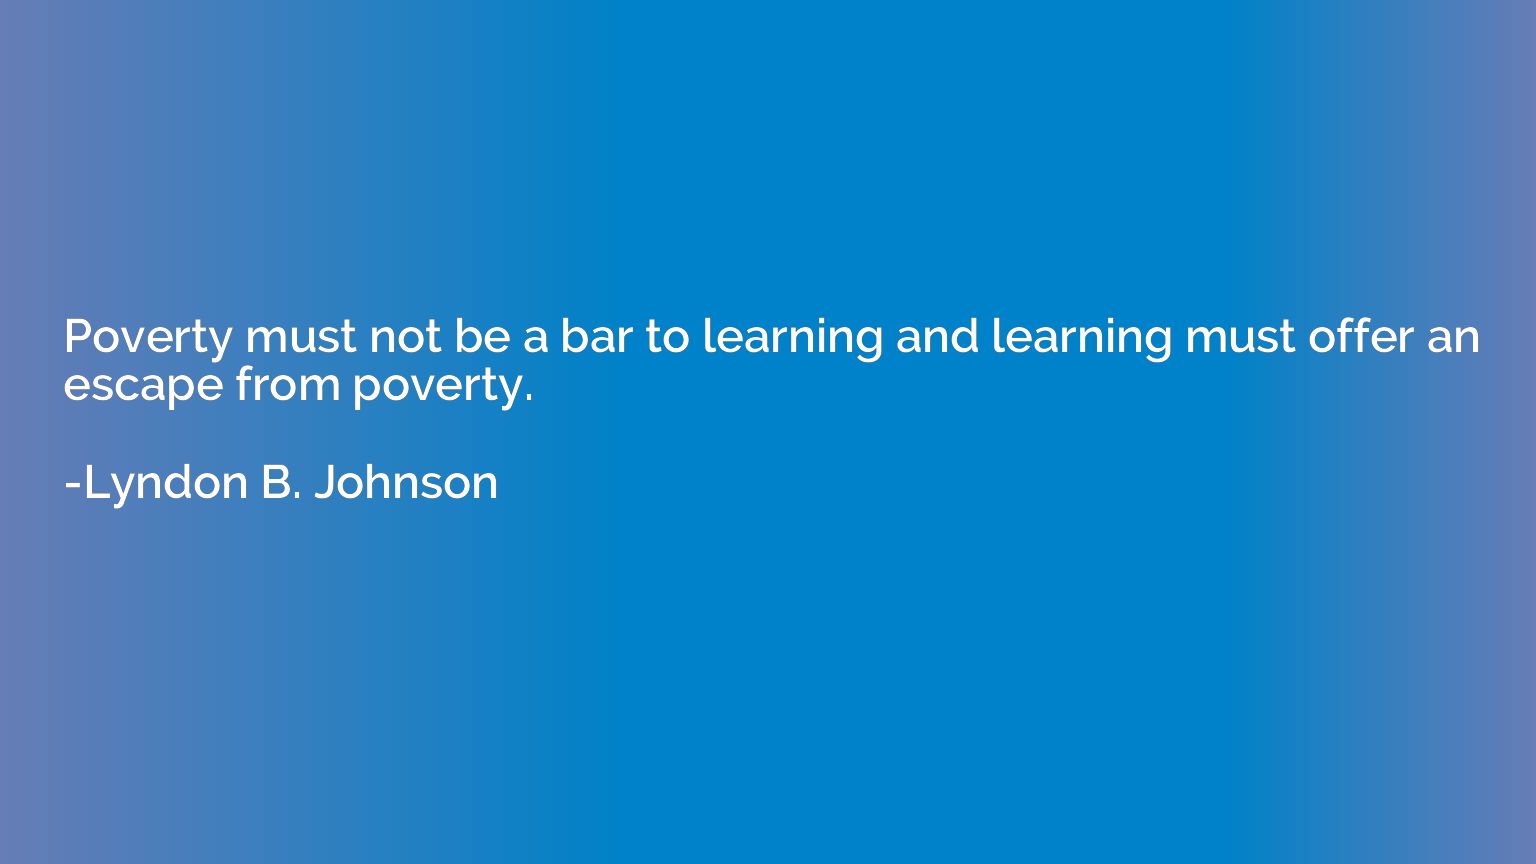 Poverty must not be a bar to learning and learning must offe